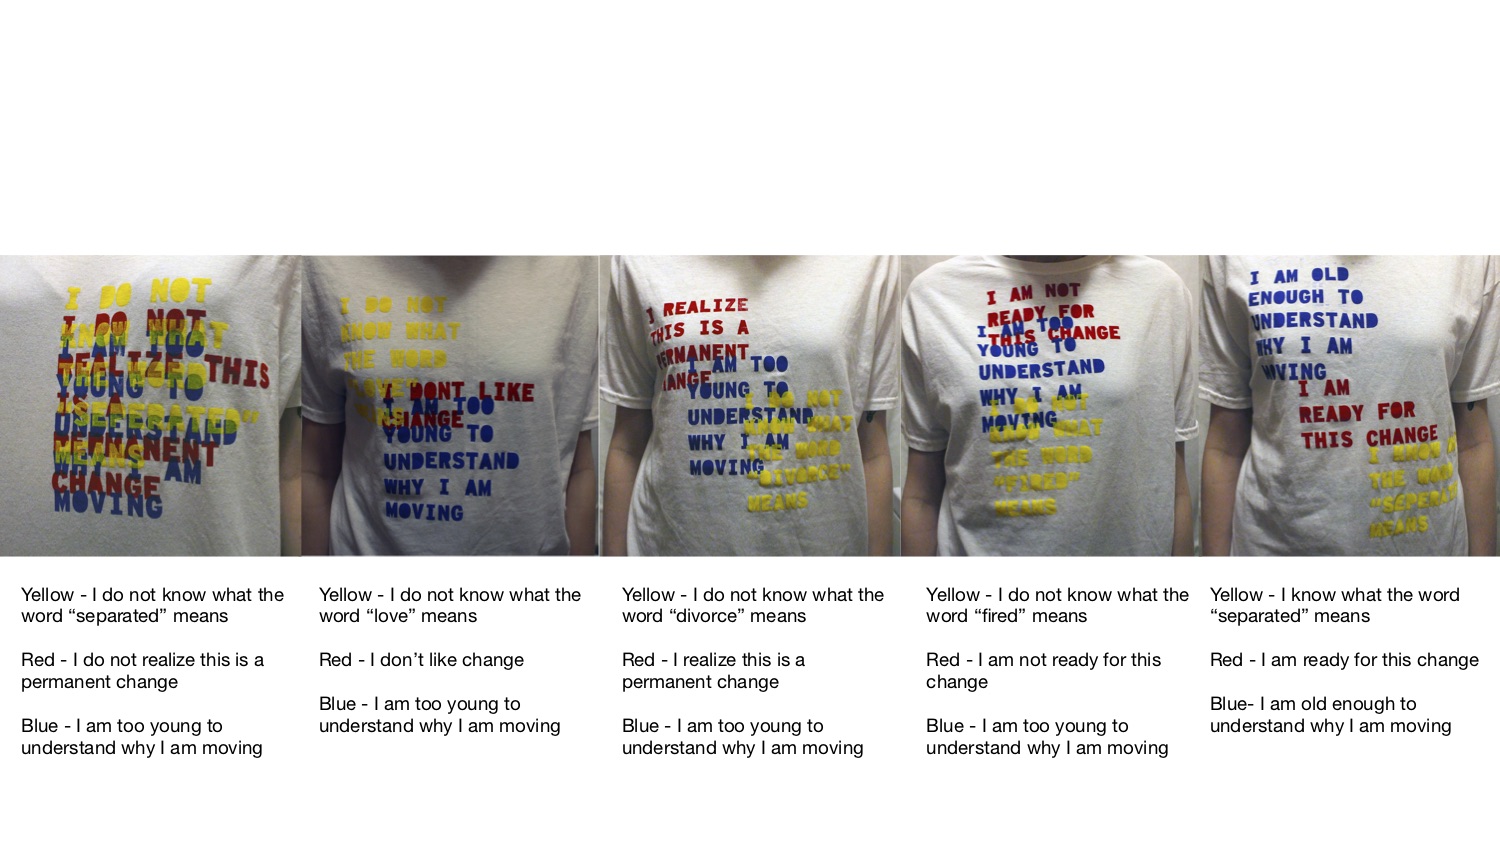 five shirts each with three phrases screen printed on in blue, yellow and red. From right to left the phrases gradually spread out across the shirt